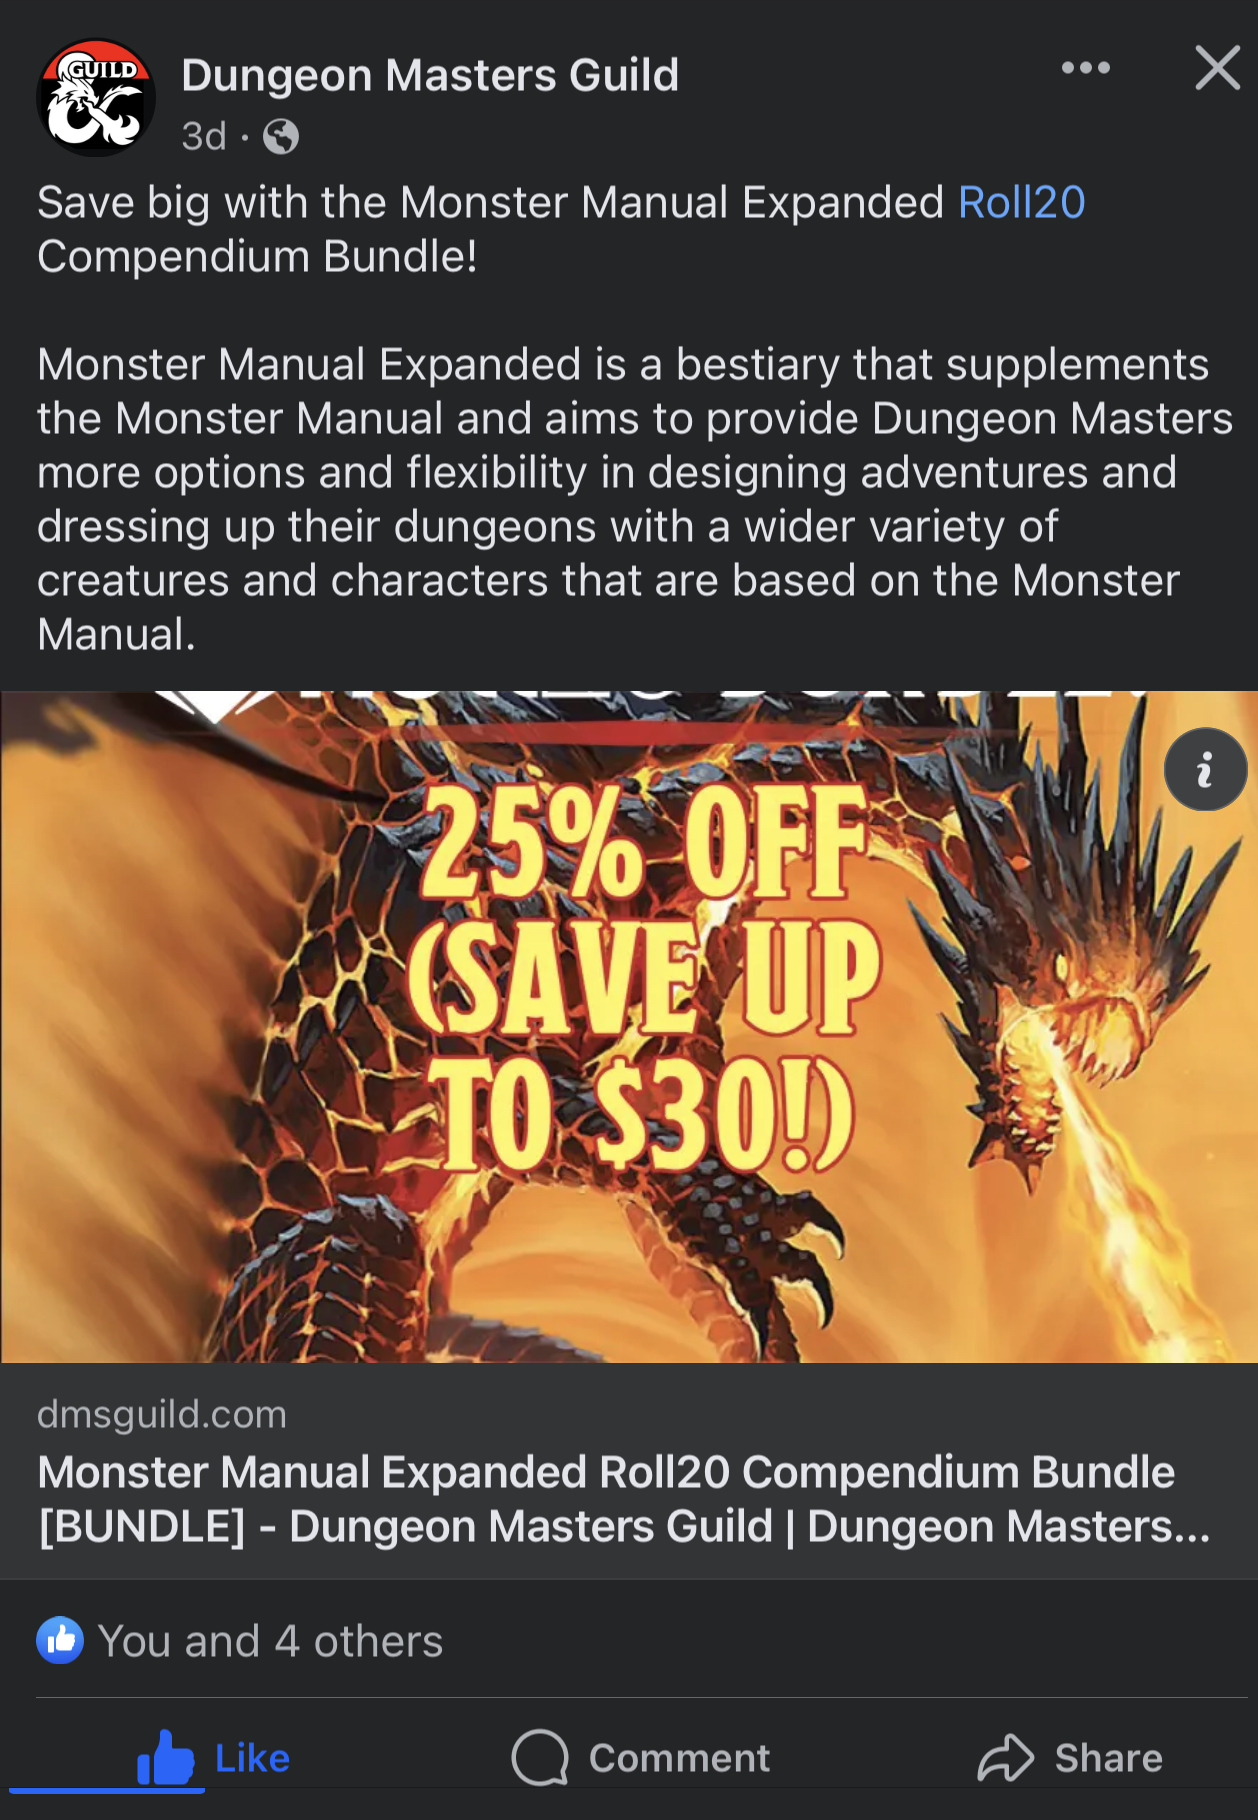 Save big with the Monster Manual Expanded Roll20 Compendium Bundle!  Monster Manual Expanded is a bestiary that supplements the Monster Manual and aims to provide Dungeon Masters more options and flexibility in designing adventures and dressing up their dungeons with a wider variety of creatures and characters that are based on the Monster Manual.